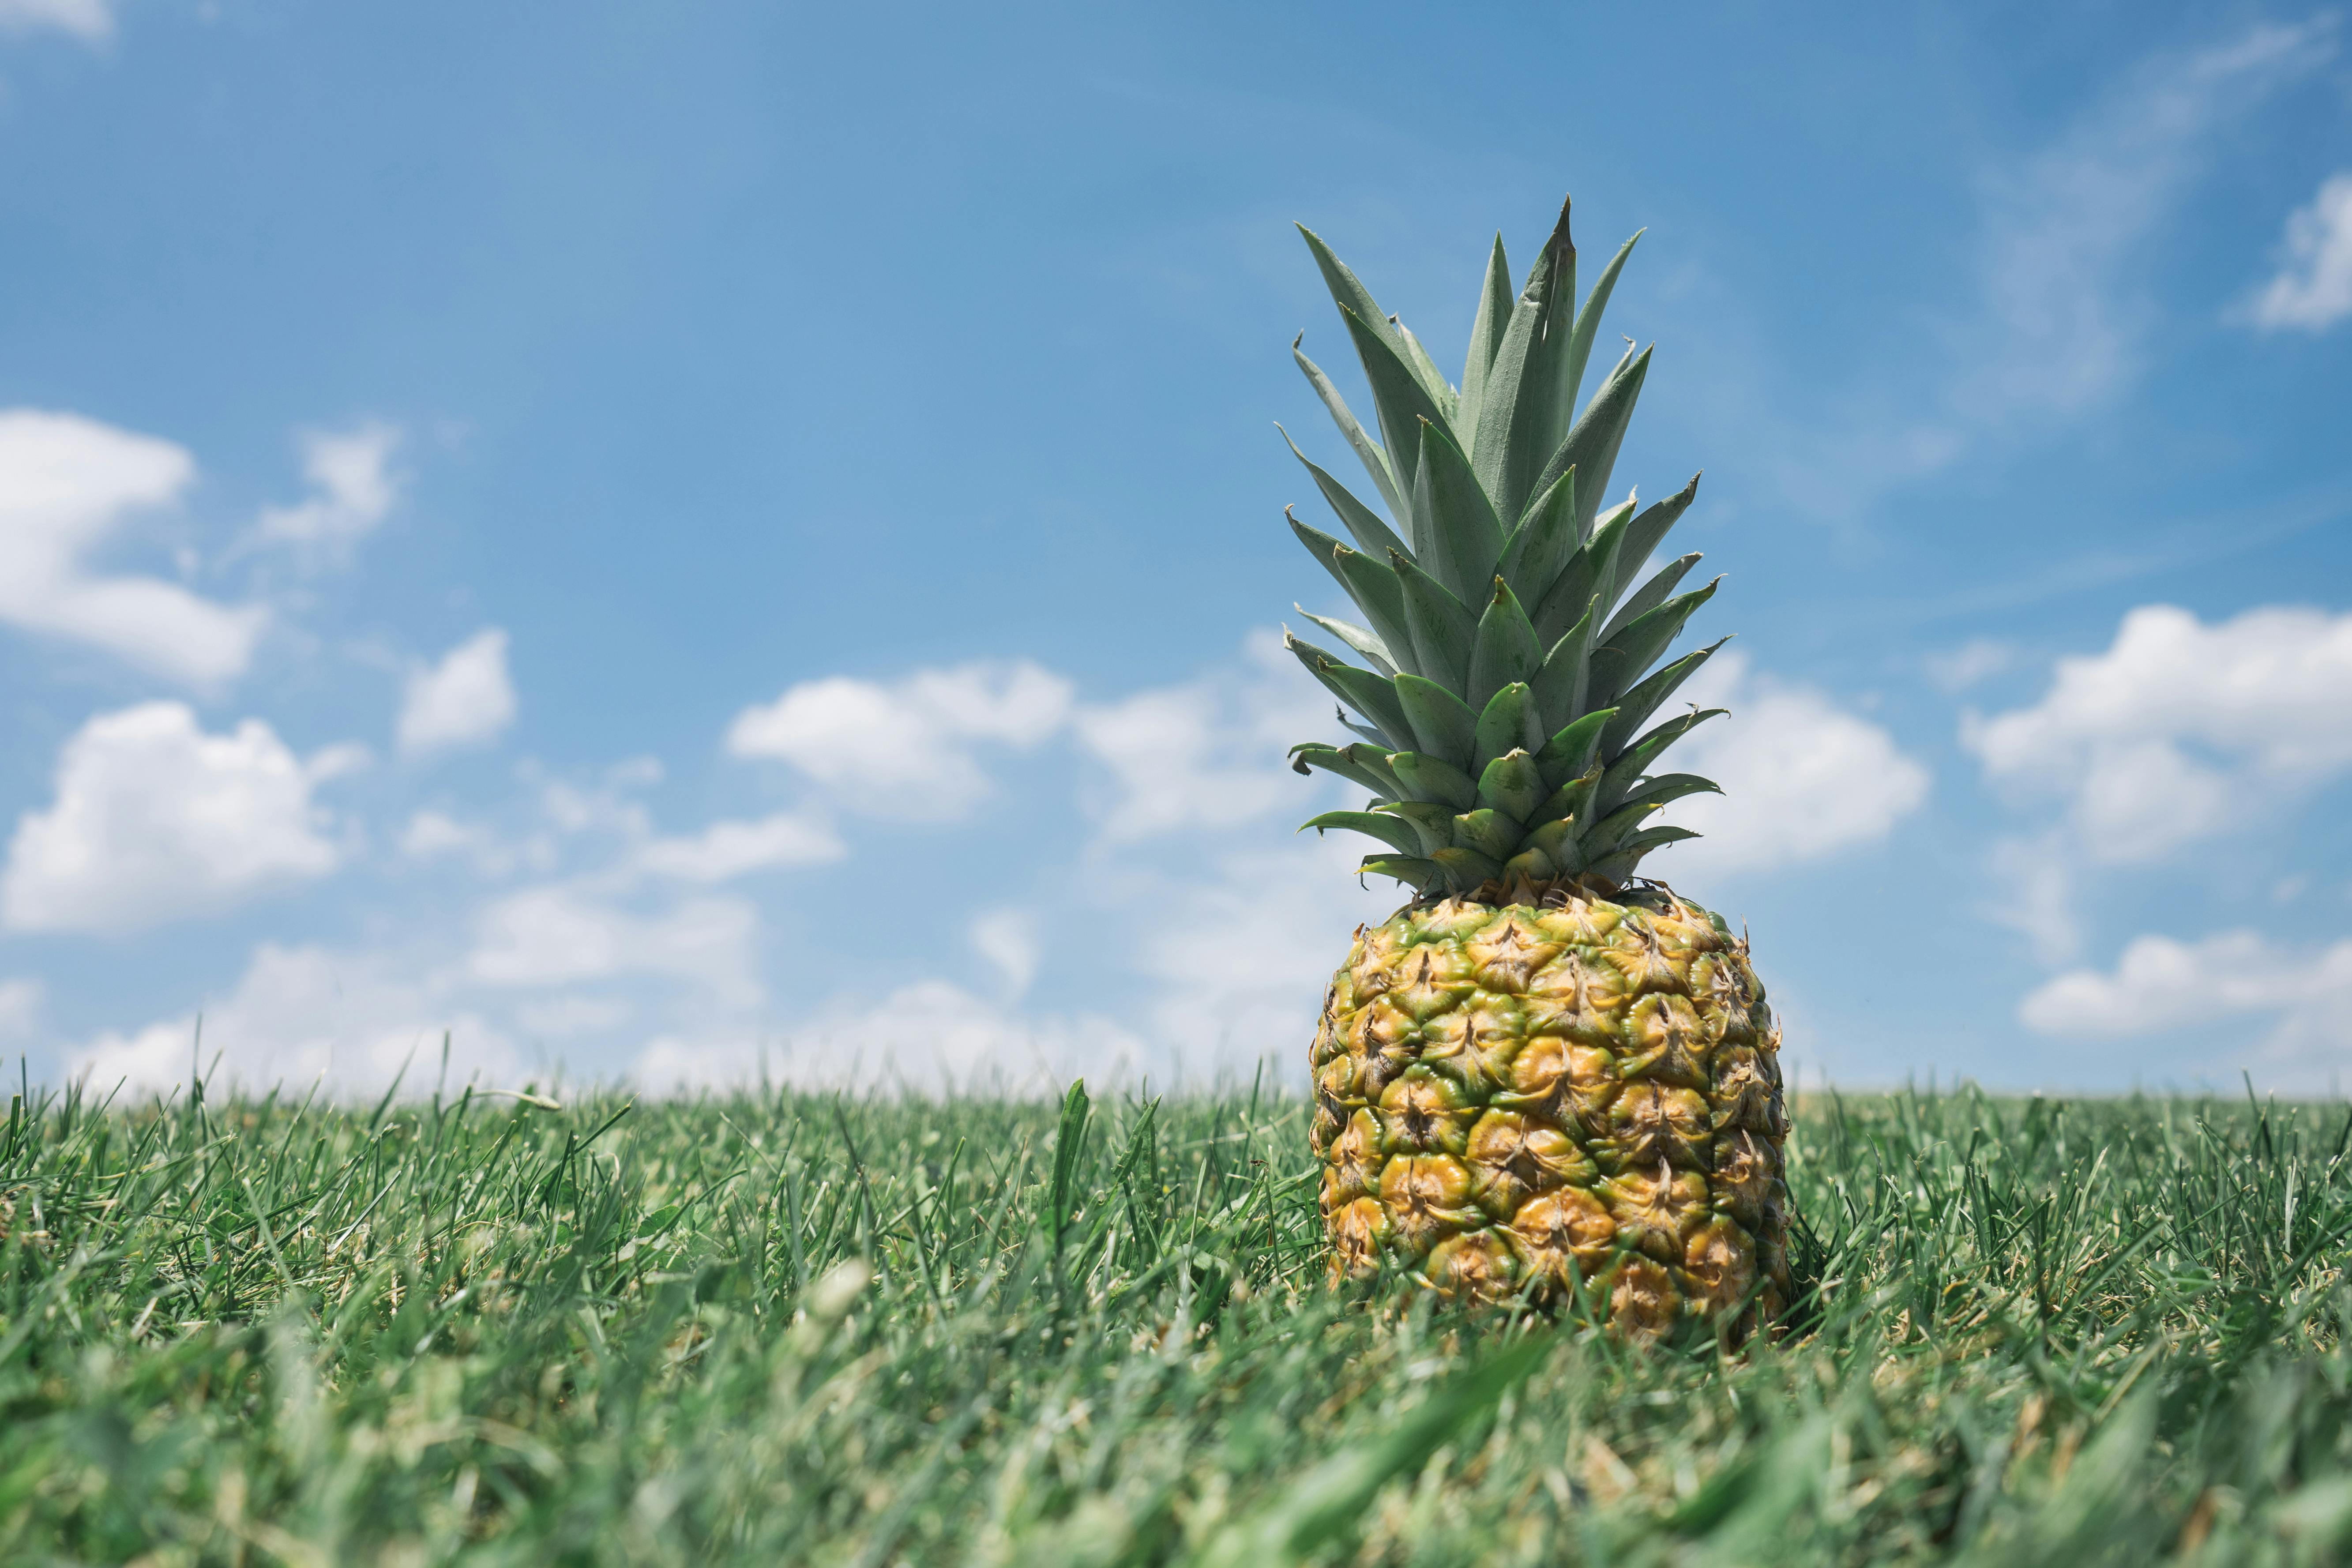 Close-up Photography of Pineapple on Grass · Free Stock Photo